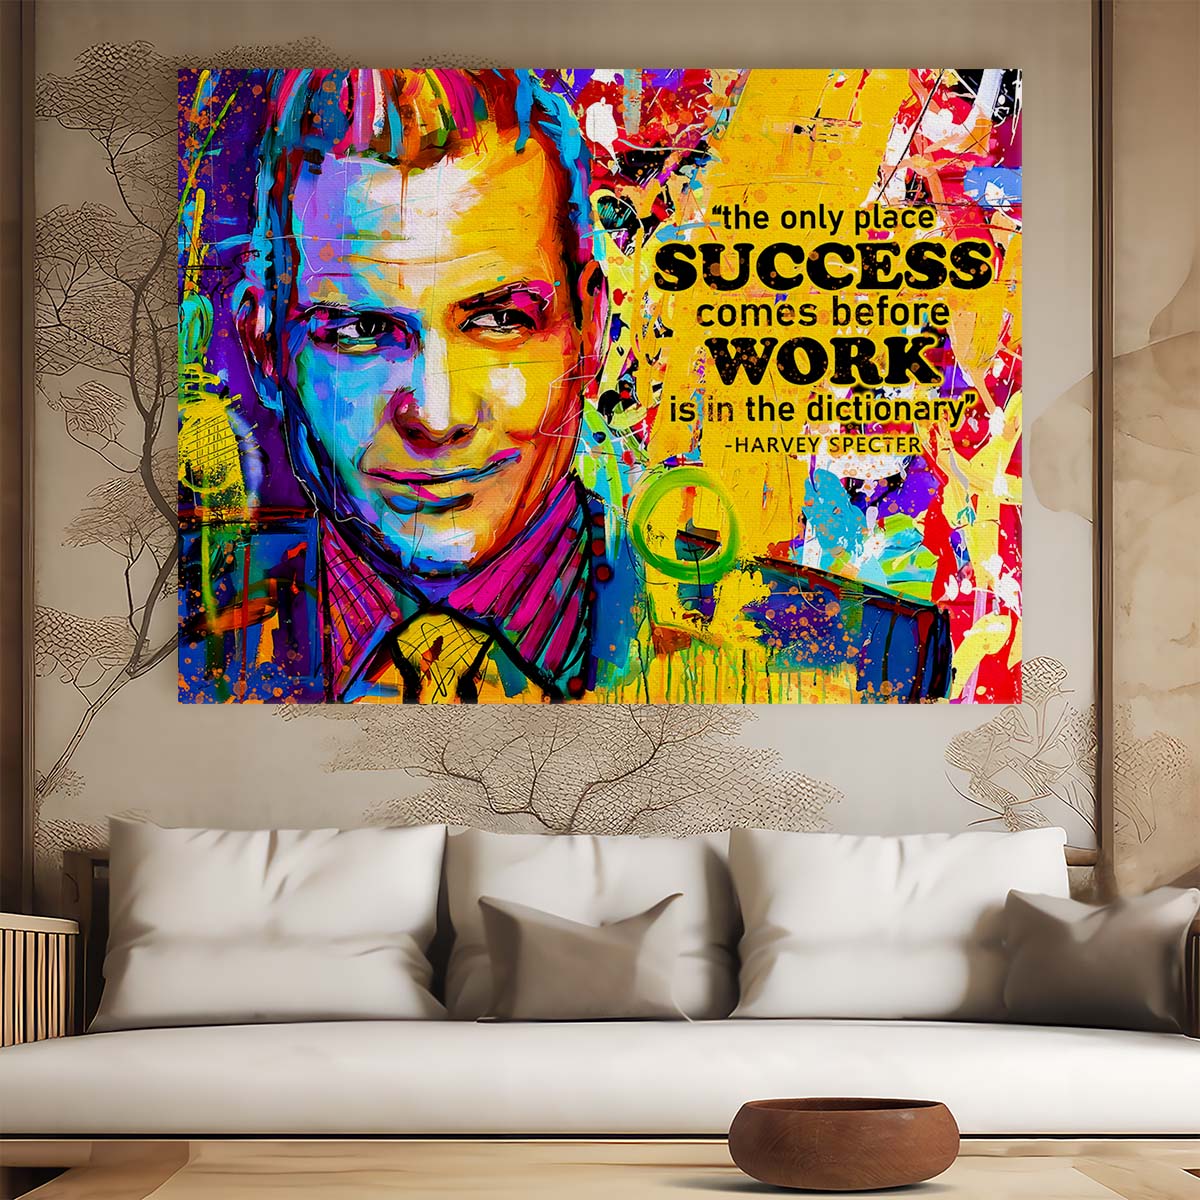 Harvey Specter Success Comes Before Work Quote Graffiti Wall Art by Luxuriance Designs. Made in USA.